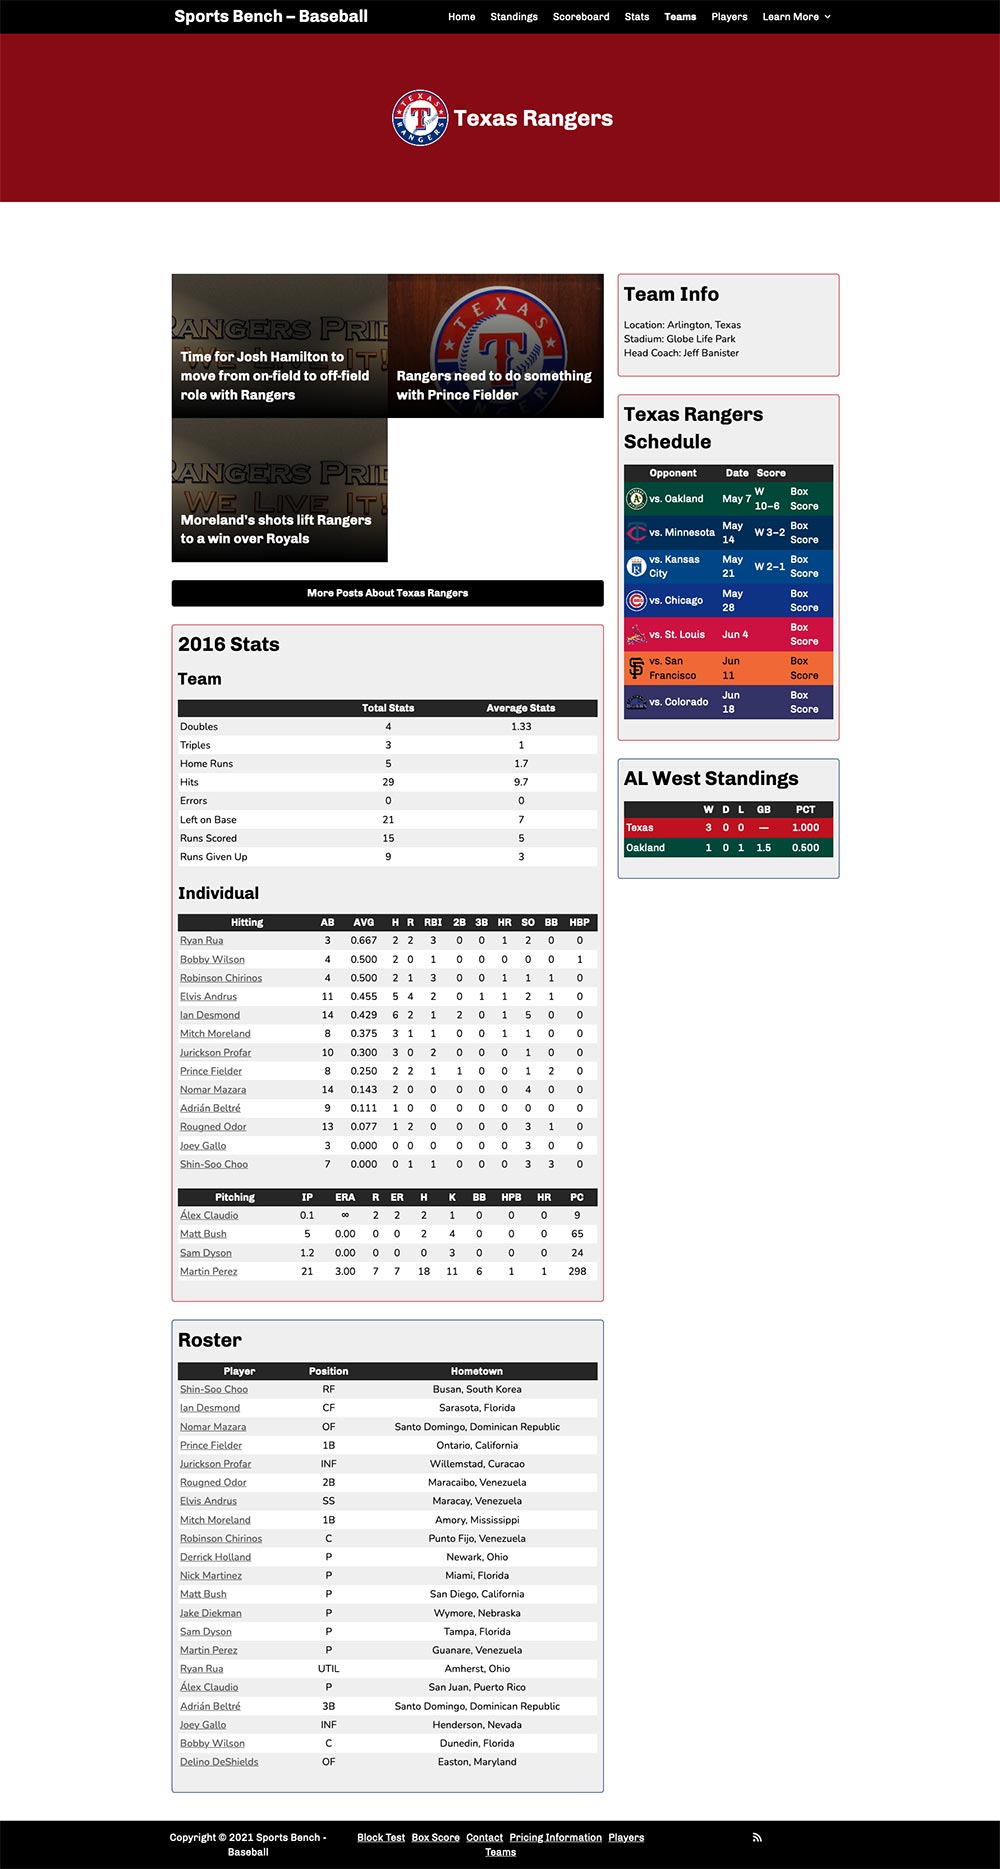 Screenshot of the baseball single team page in Sports Bench